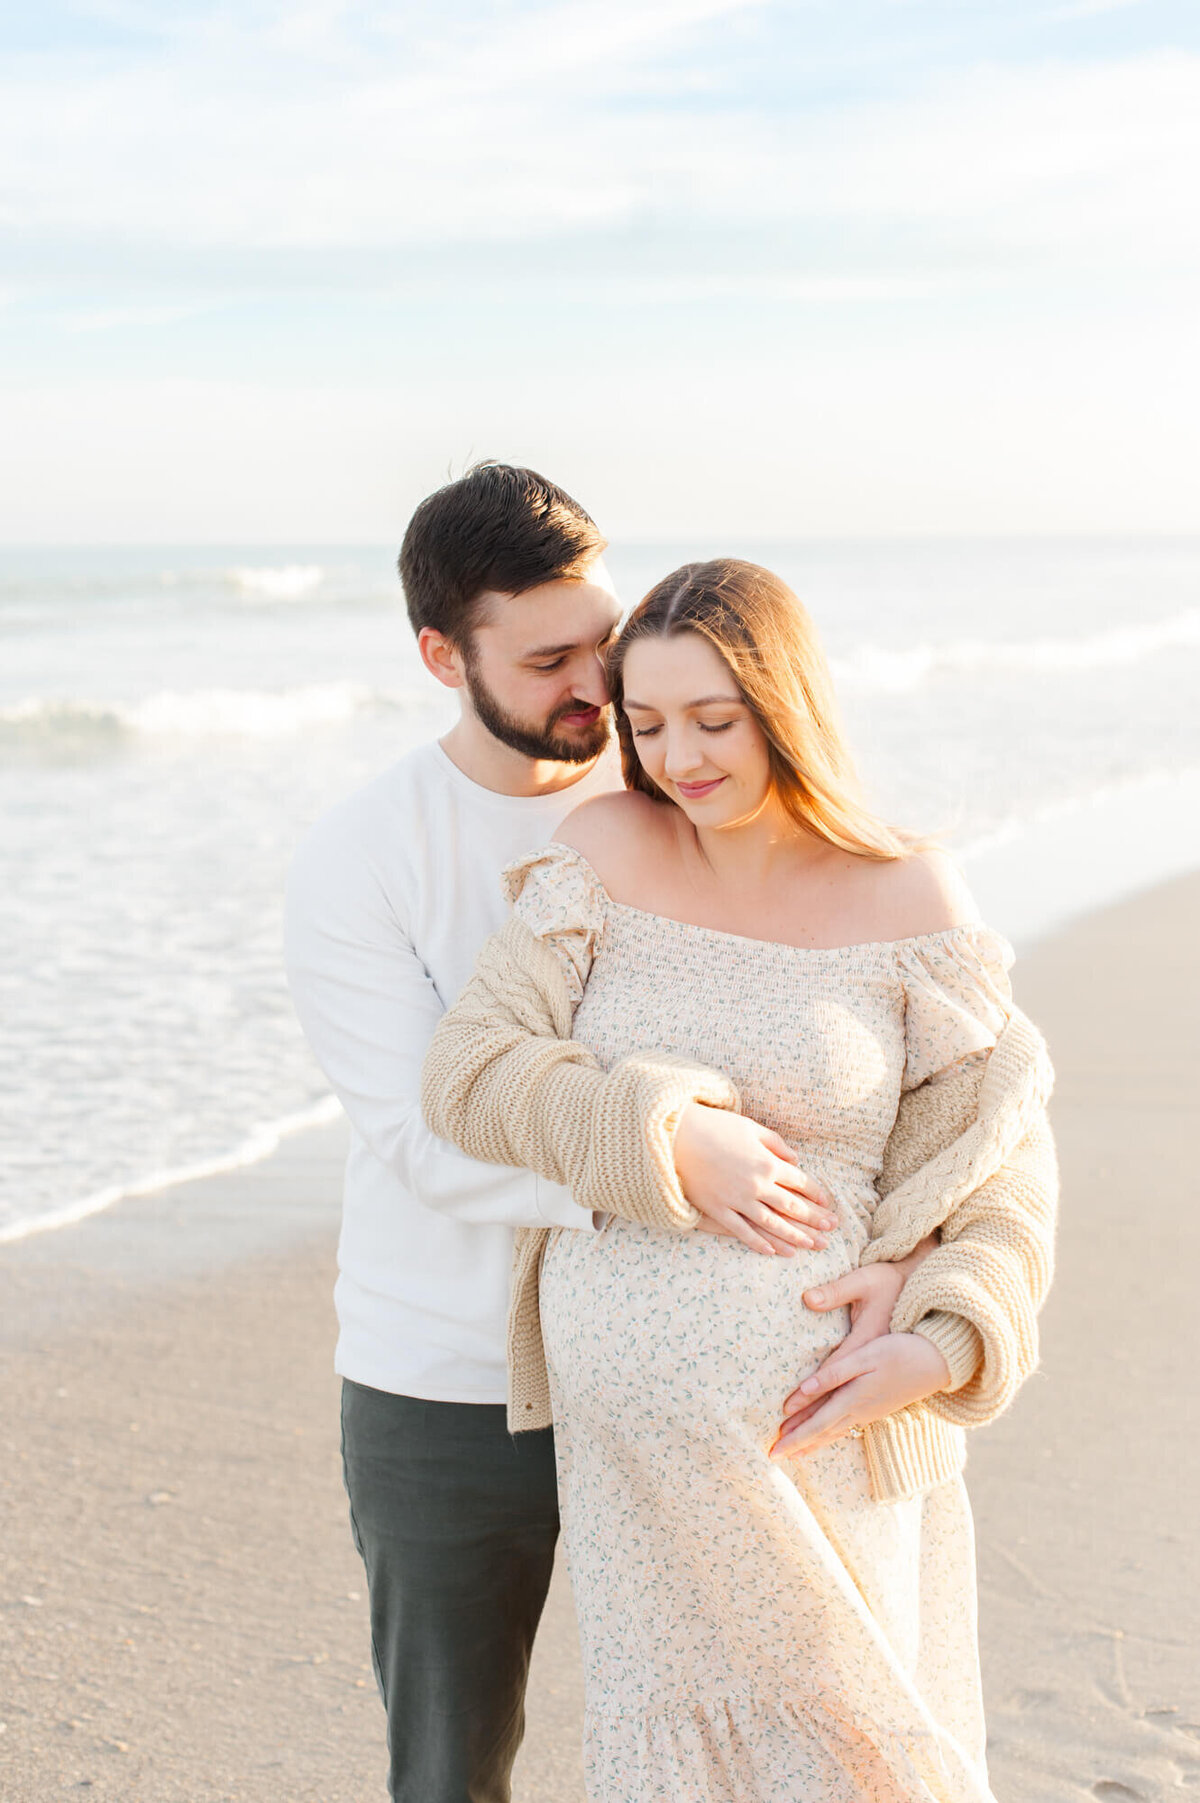 Stunning image with beautiful light at golden hour while mom and dad hold moms belly